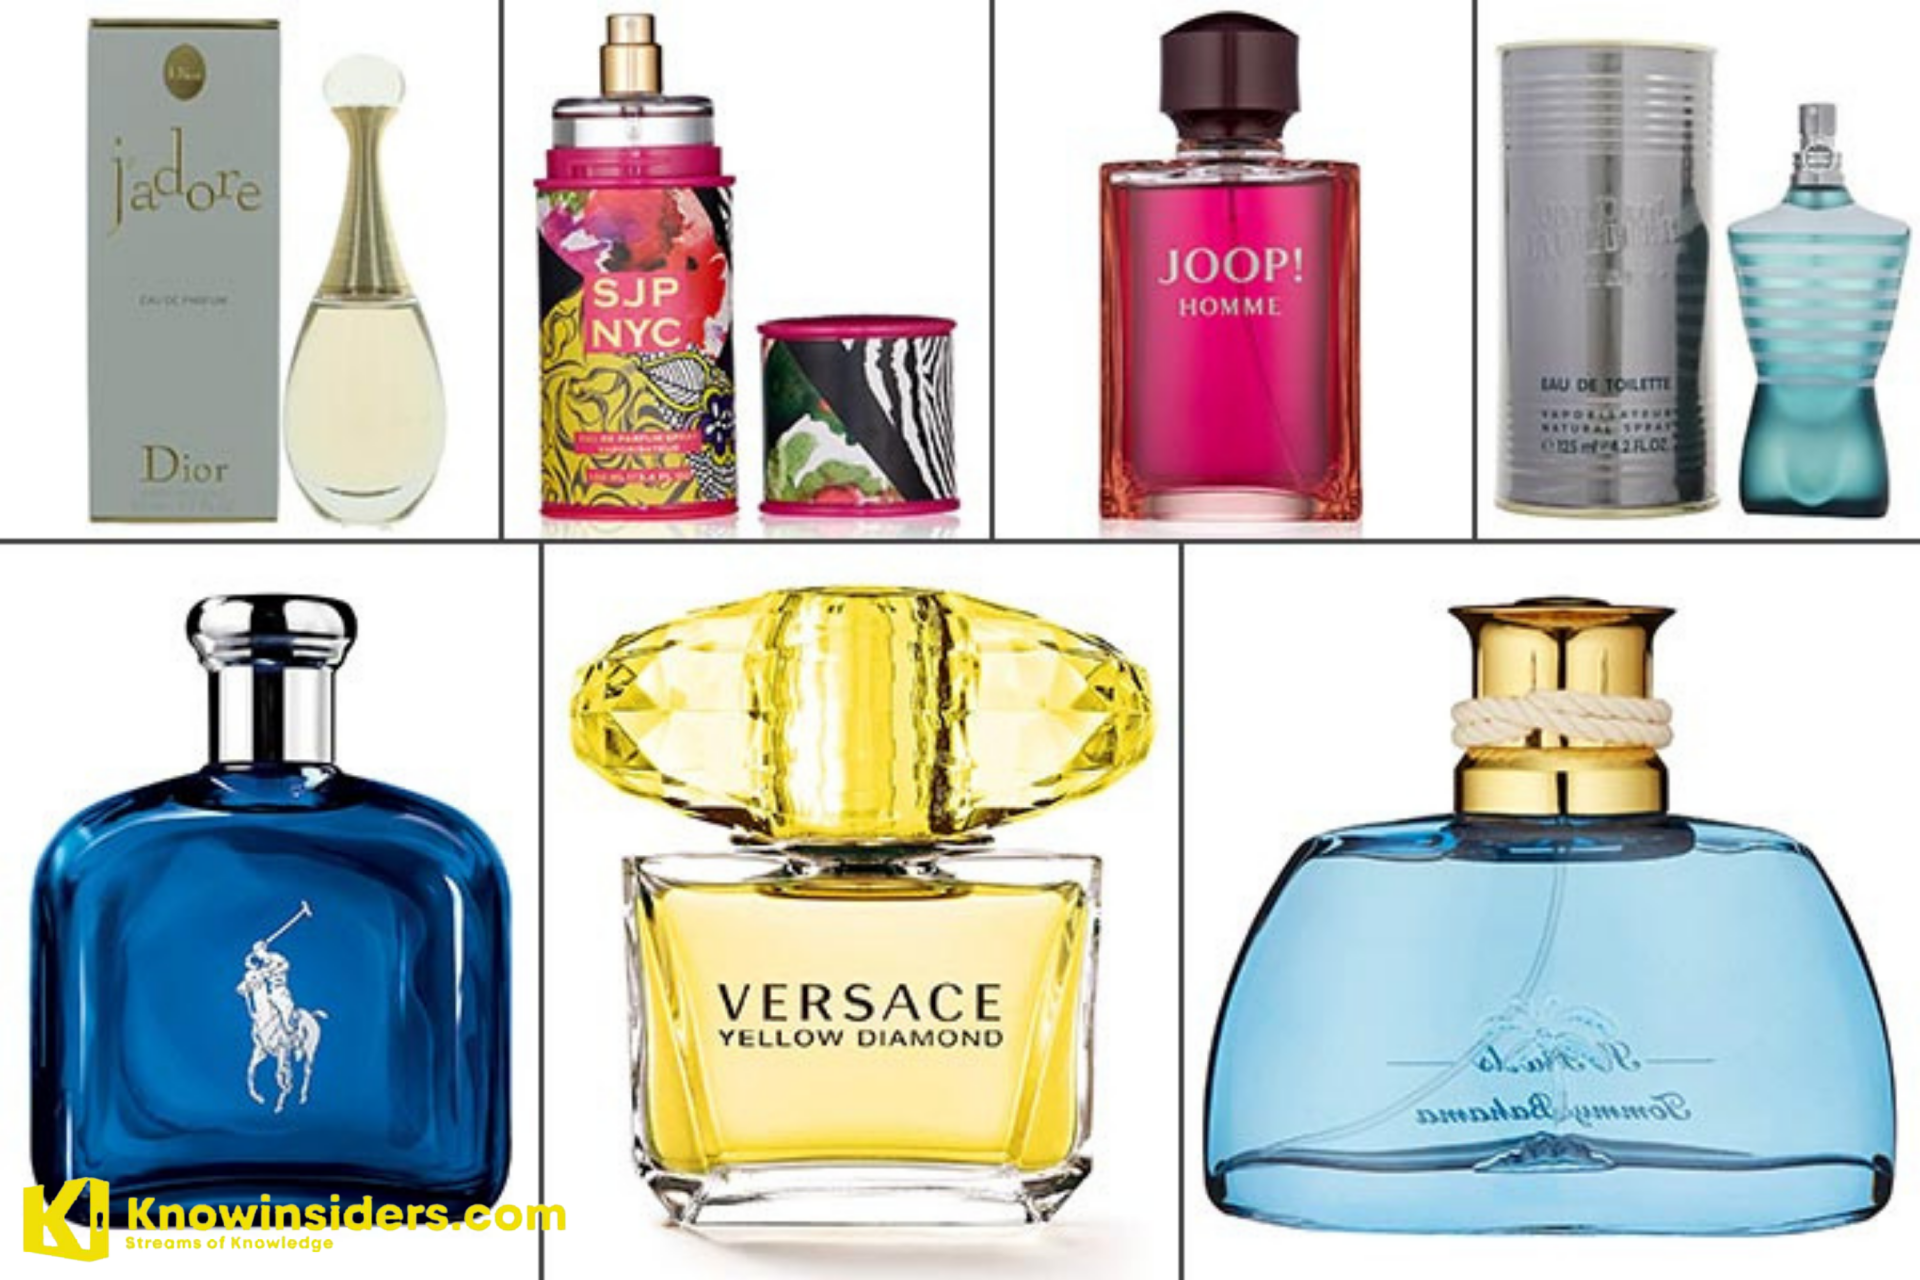 Top 5 Perfumes for Women under 35